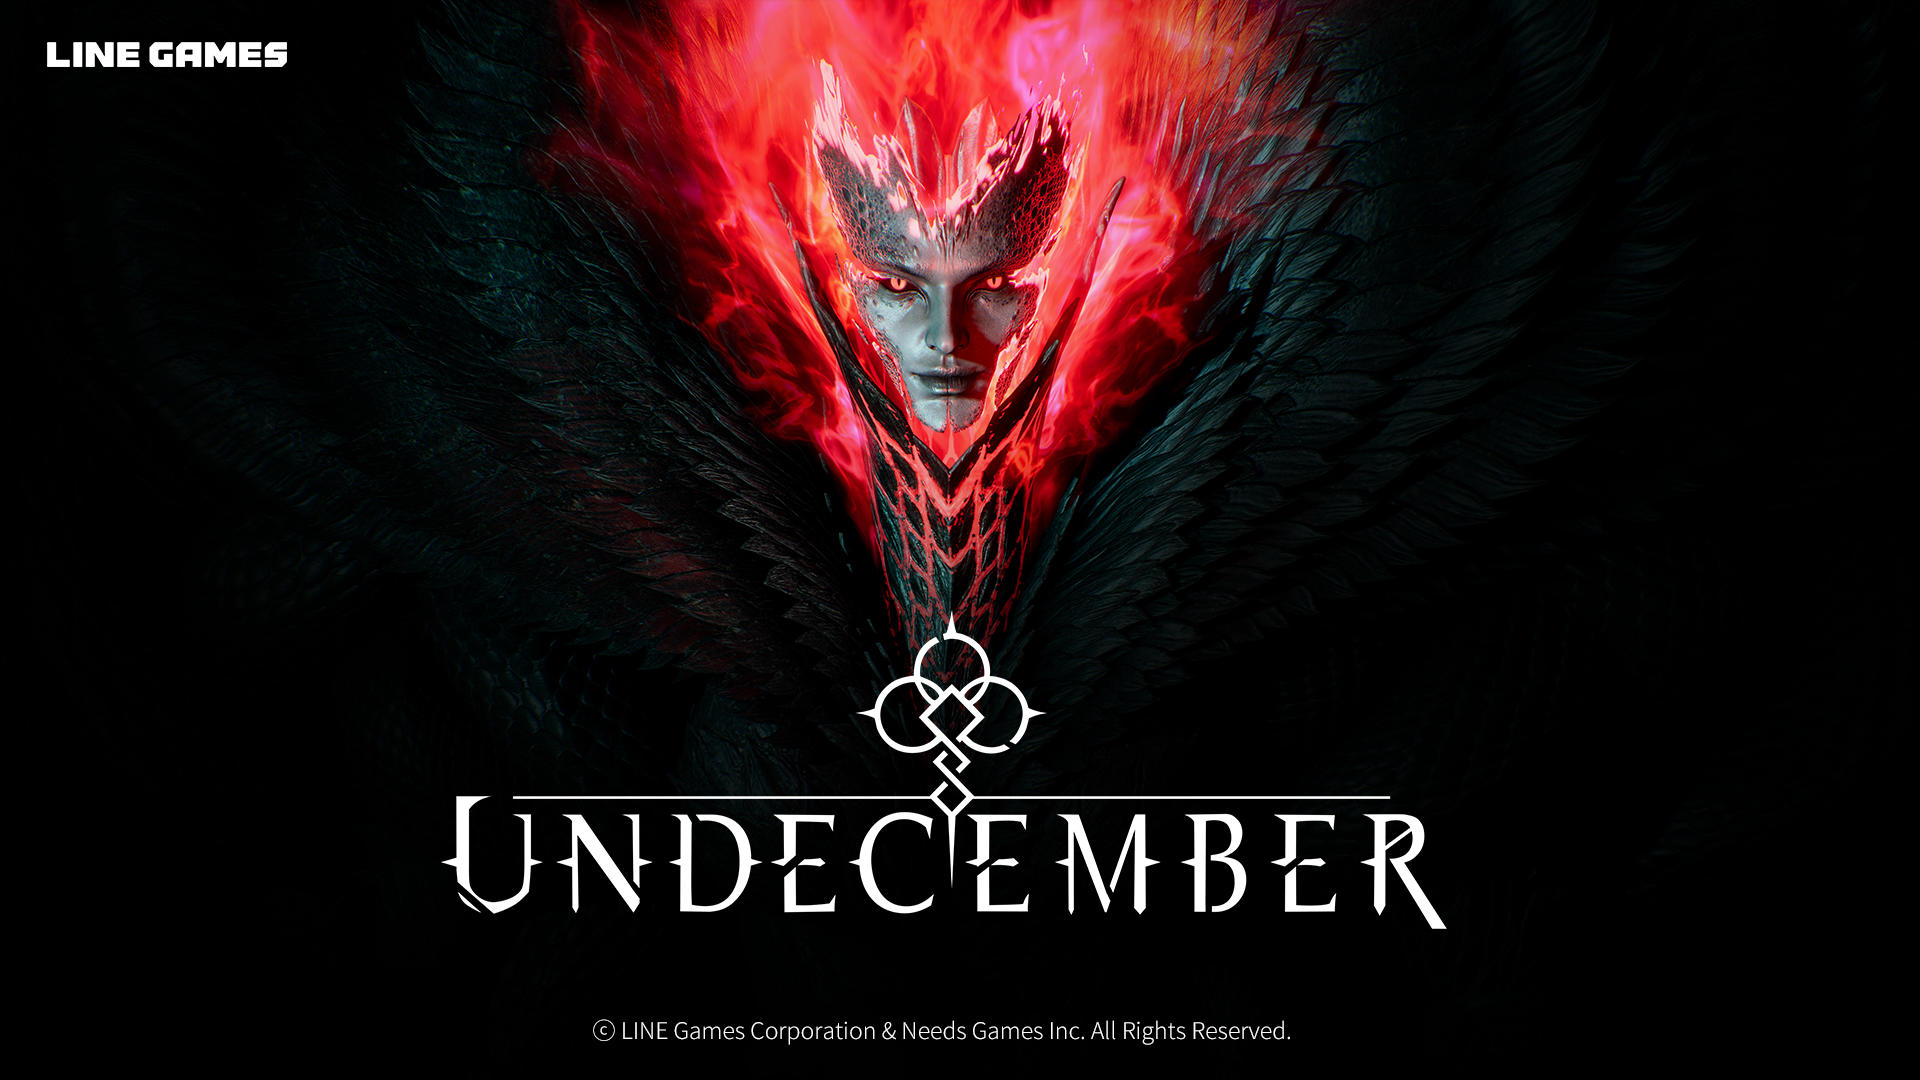 Hack-and-Slash 'UNDECEMBER new update preview! Act 12 'Ganida